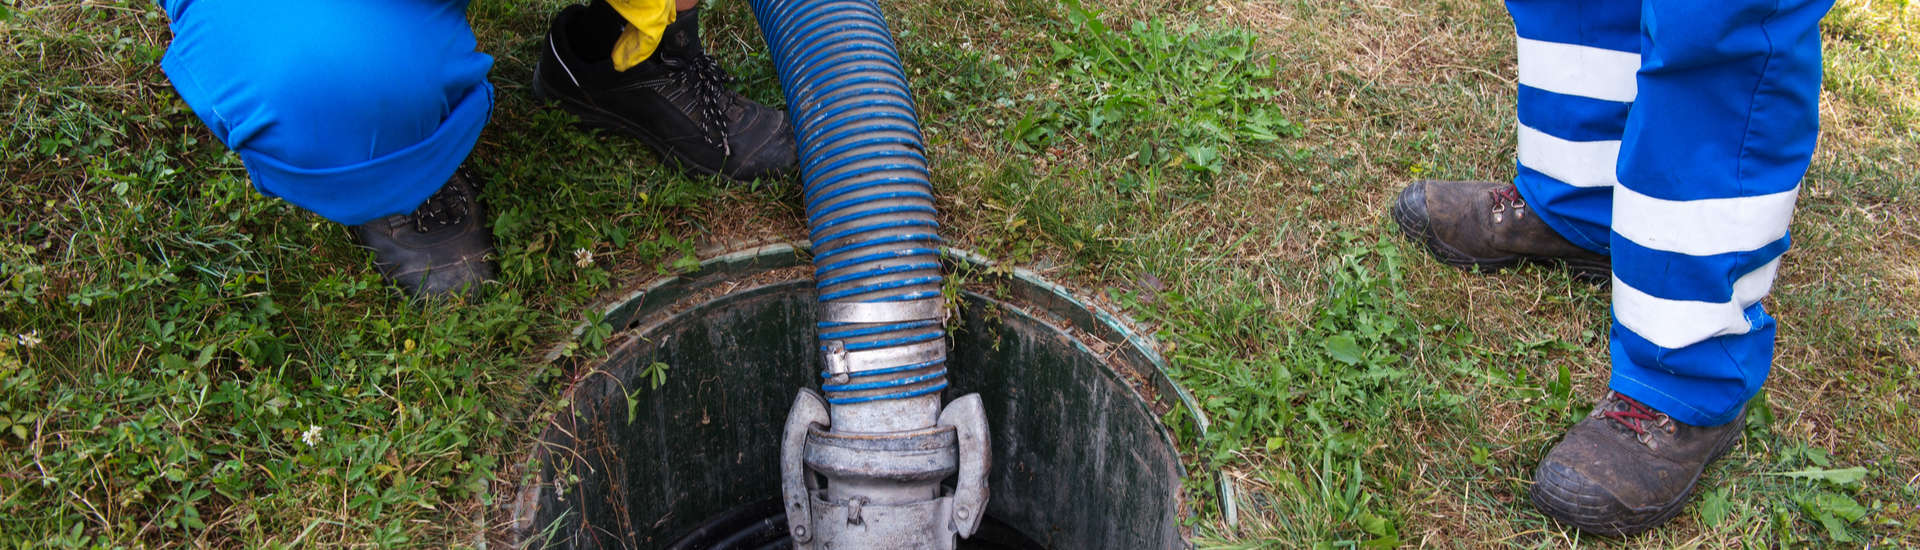 Sewer Cleaning Danvers IL